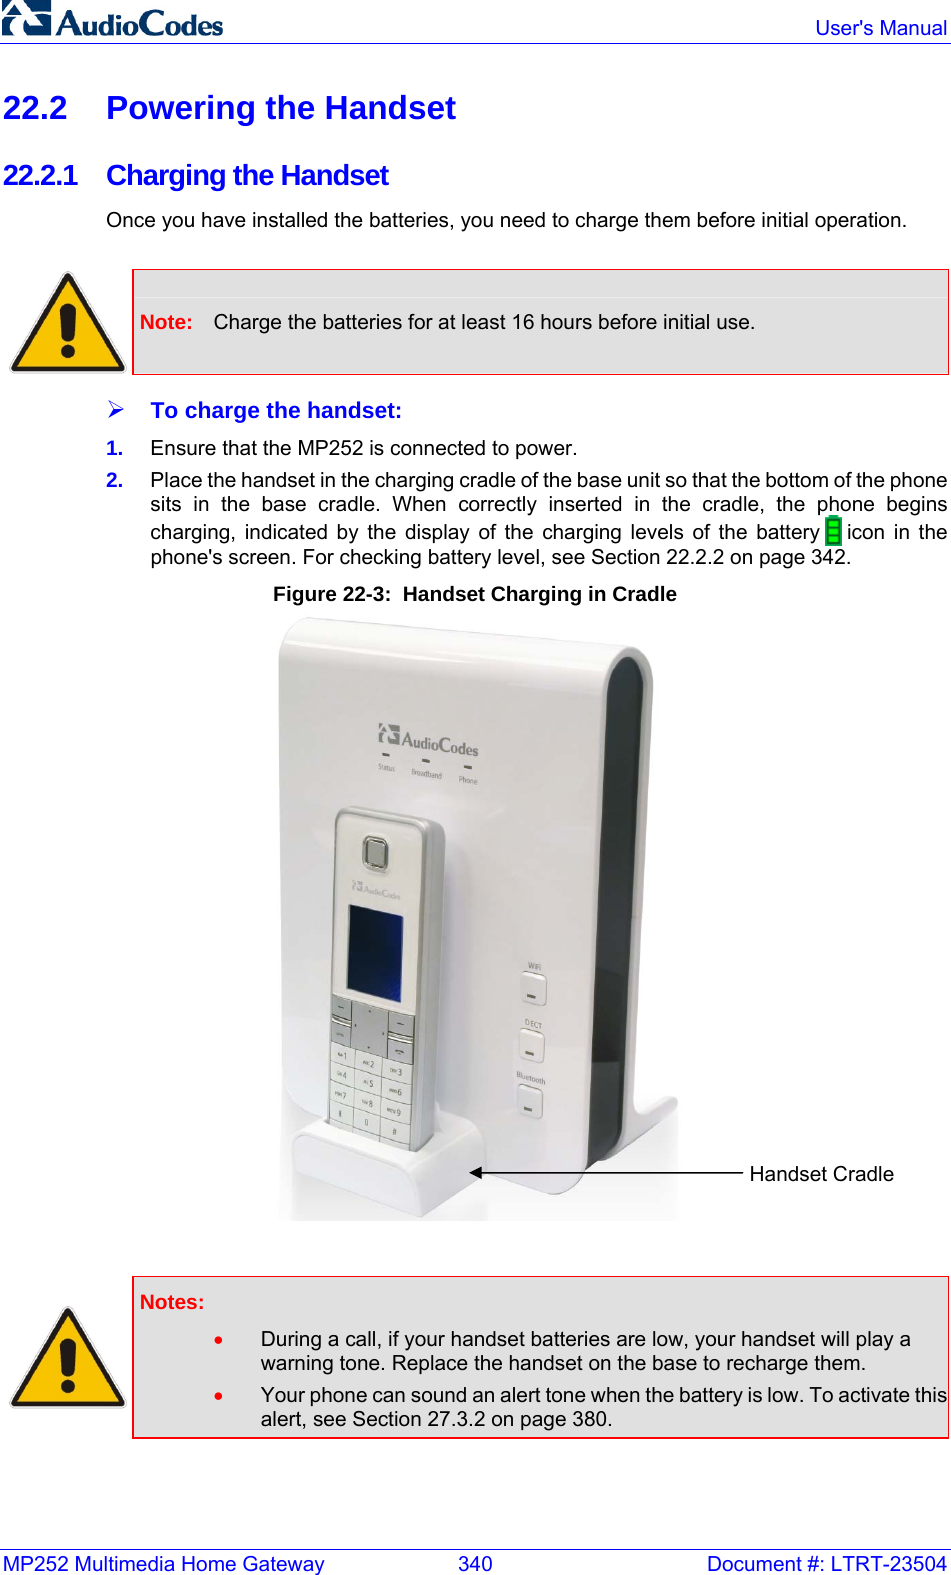 MP252 Multimedia Home Gateway  340  Document #: LTRT-23504  User&apos;s Manual  22.2  Powering the Handset 22.2.1 Charging the Handset Once you have installed the batteries, you need to charge them before initial operation.   Note:  Charge the batteries for at least 16 hours before initial use. ¾ To charge the handset: 1.  Ensure that the MP252 is connected to power.  2.  Place the handset in the charging cradle of the base unit so that the bottom of the phone sits in the base cradle. When correctly inserted in the cradle, the phone begins charging, indicated by the display of the charging levels of the battery   icon in the phone&apos;s screen. For checking battery level, see Section 22.2.2 on page 342. Figure 22-3:  Handset Charging in Cradle    Notes:  • During a call, if your handset batteries are low, your handset will play a warning tone. Replace the handset on the base to recharge them. • Your phone can sound an alert tone when the battery is low. To activate this alert, see Section 27.3.2 on page 380. Handset Cradle 